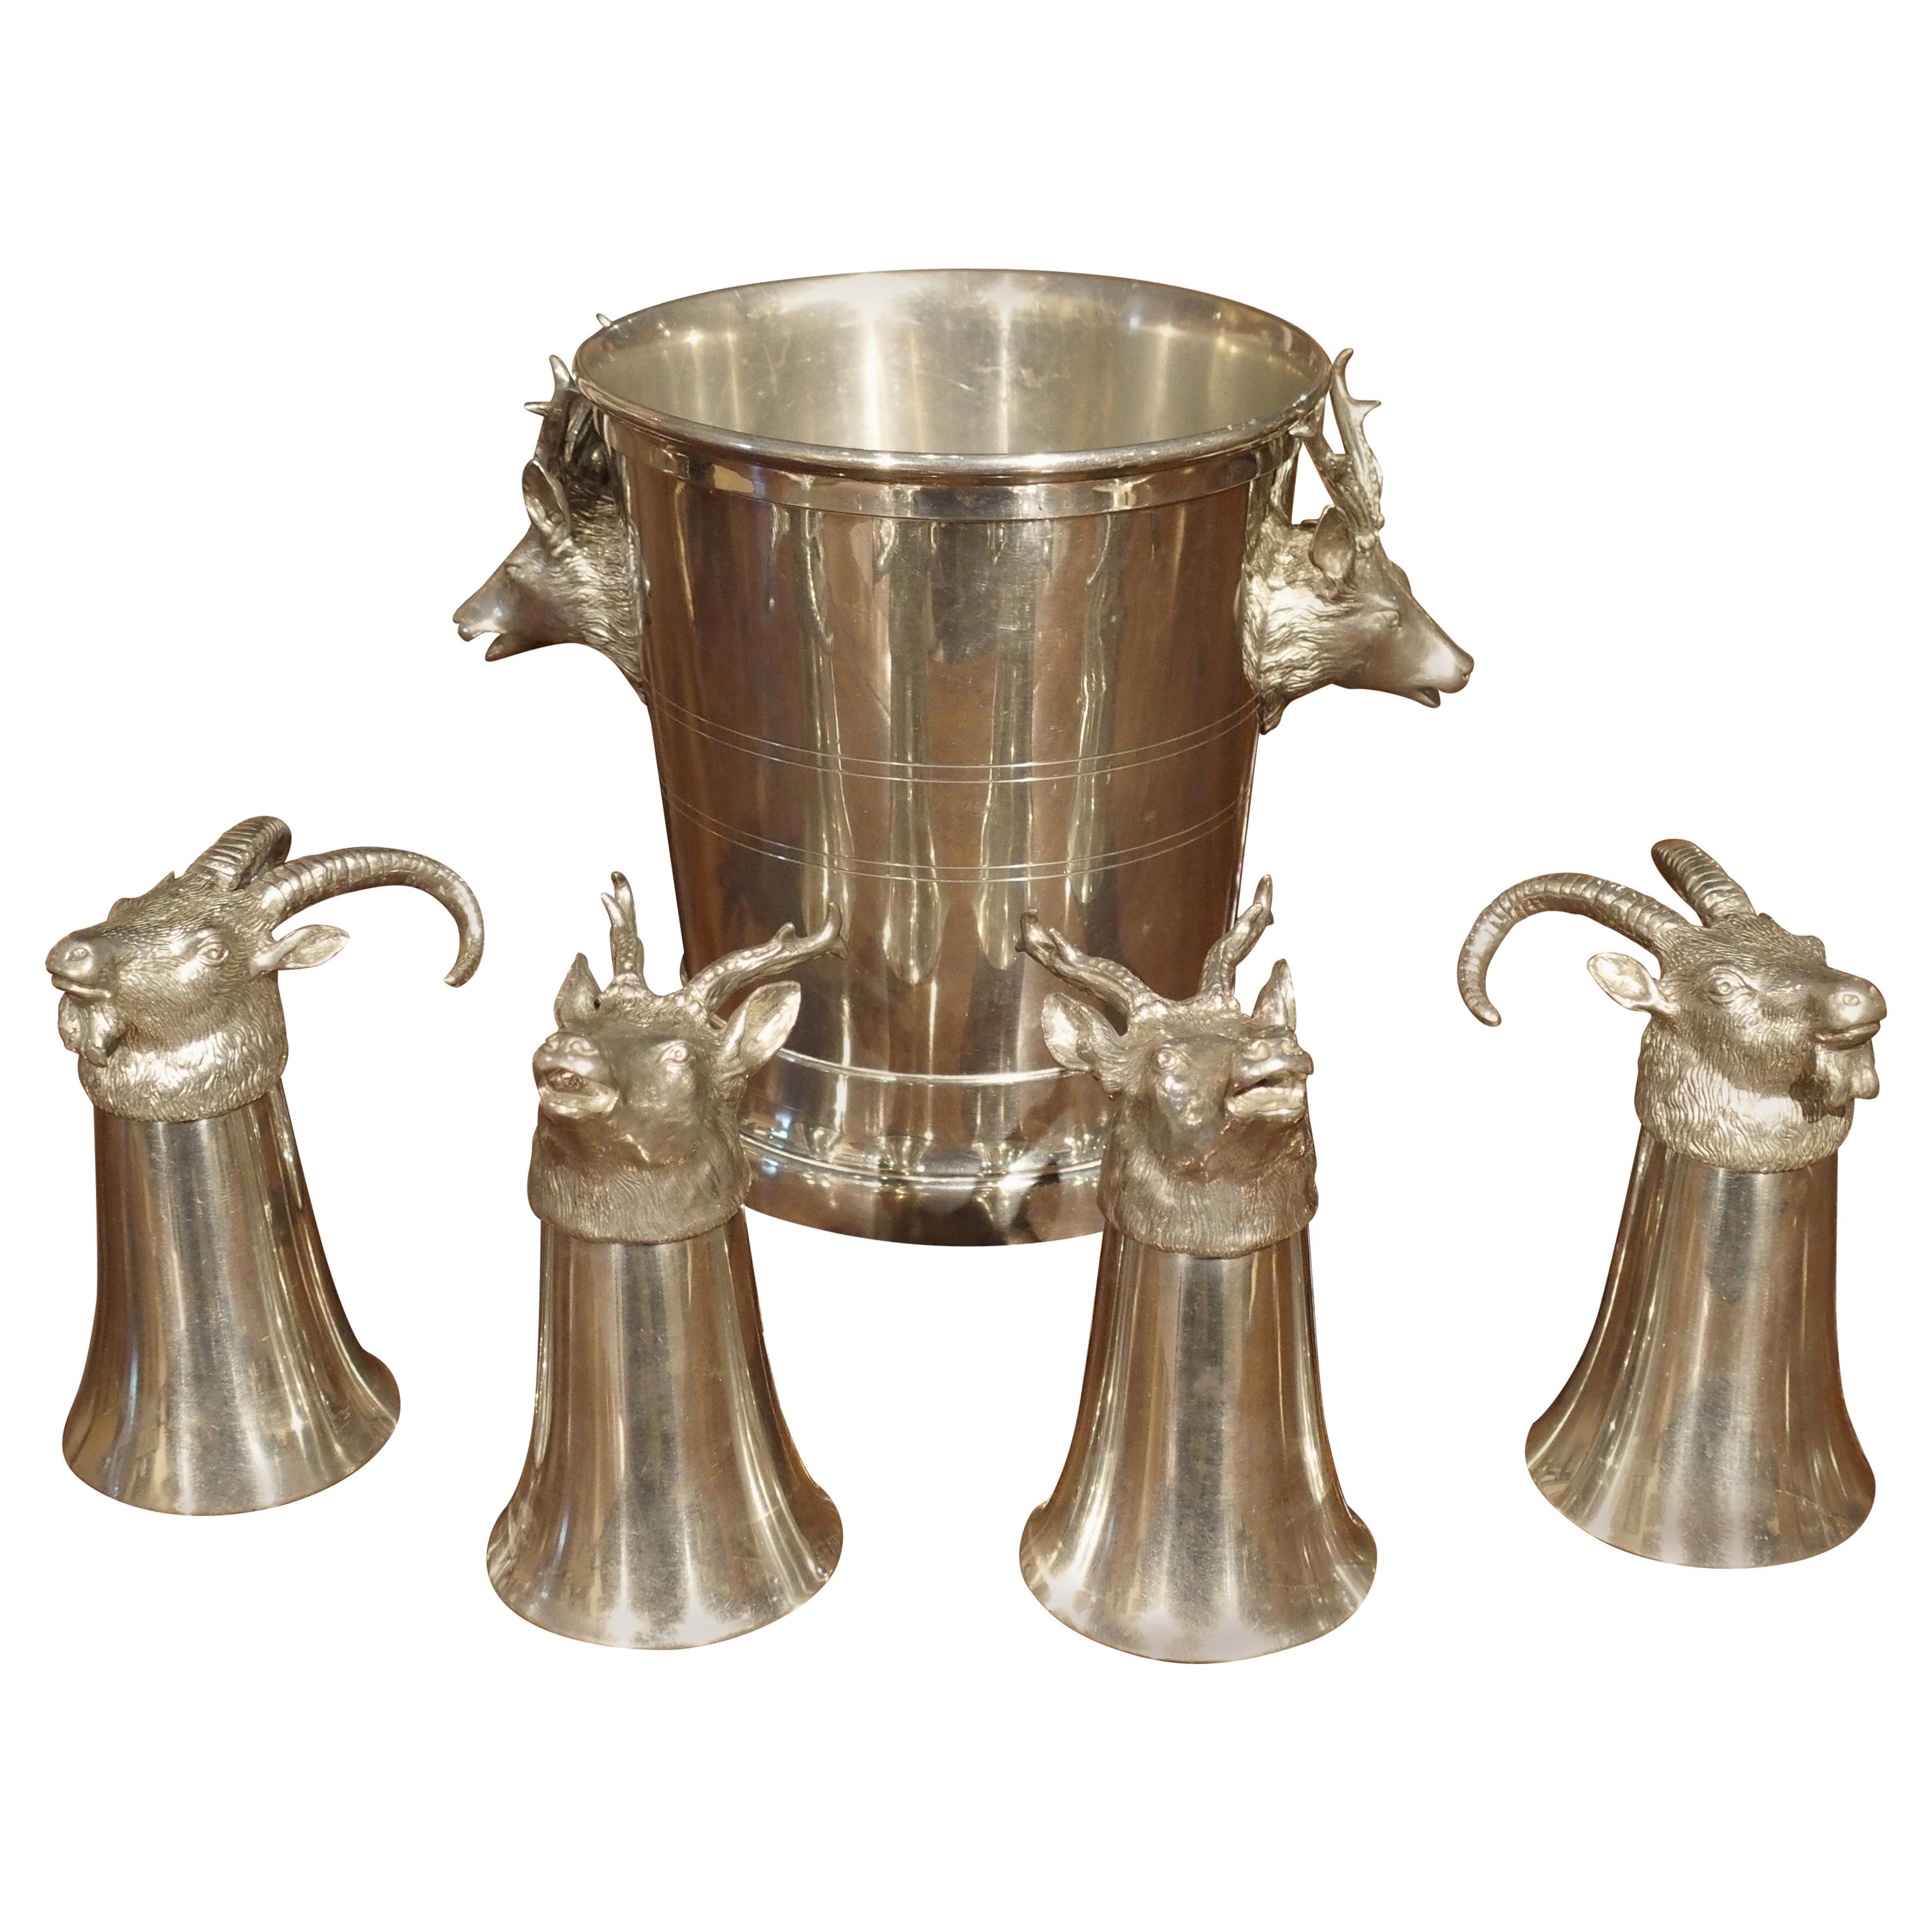 Set of 4 Polished Pewter Stag and Ibex Stirrup Cups with Ice Bucket